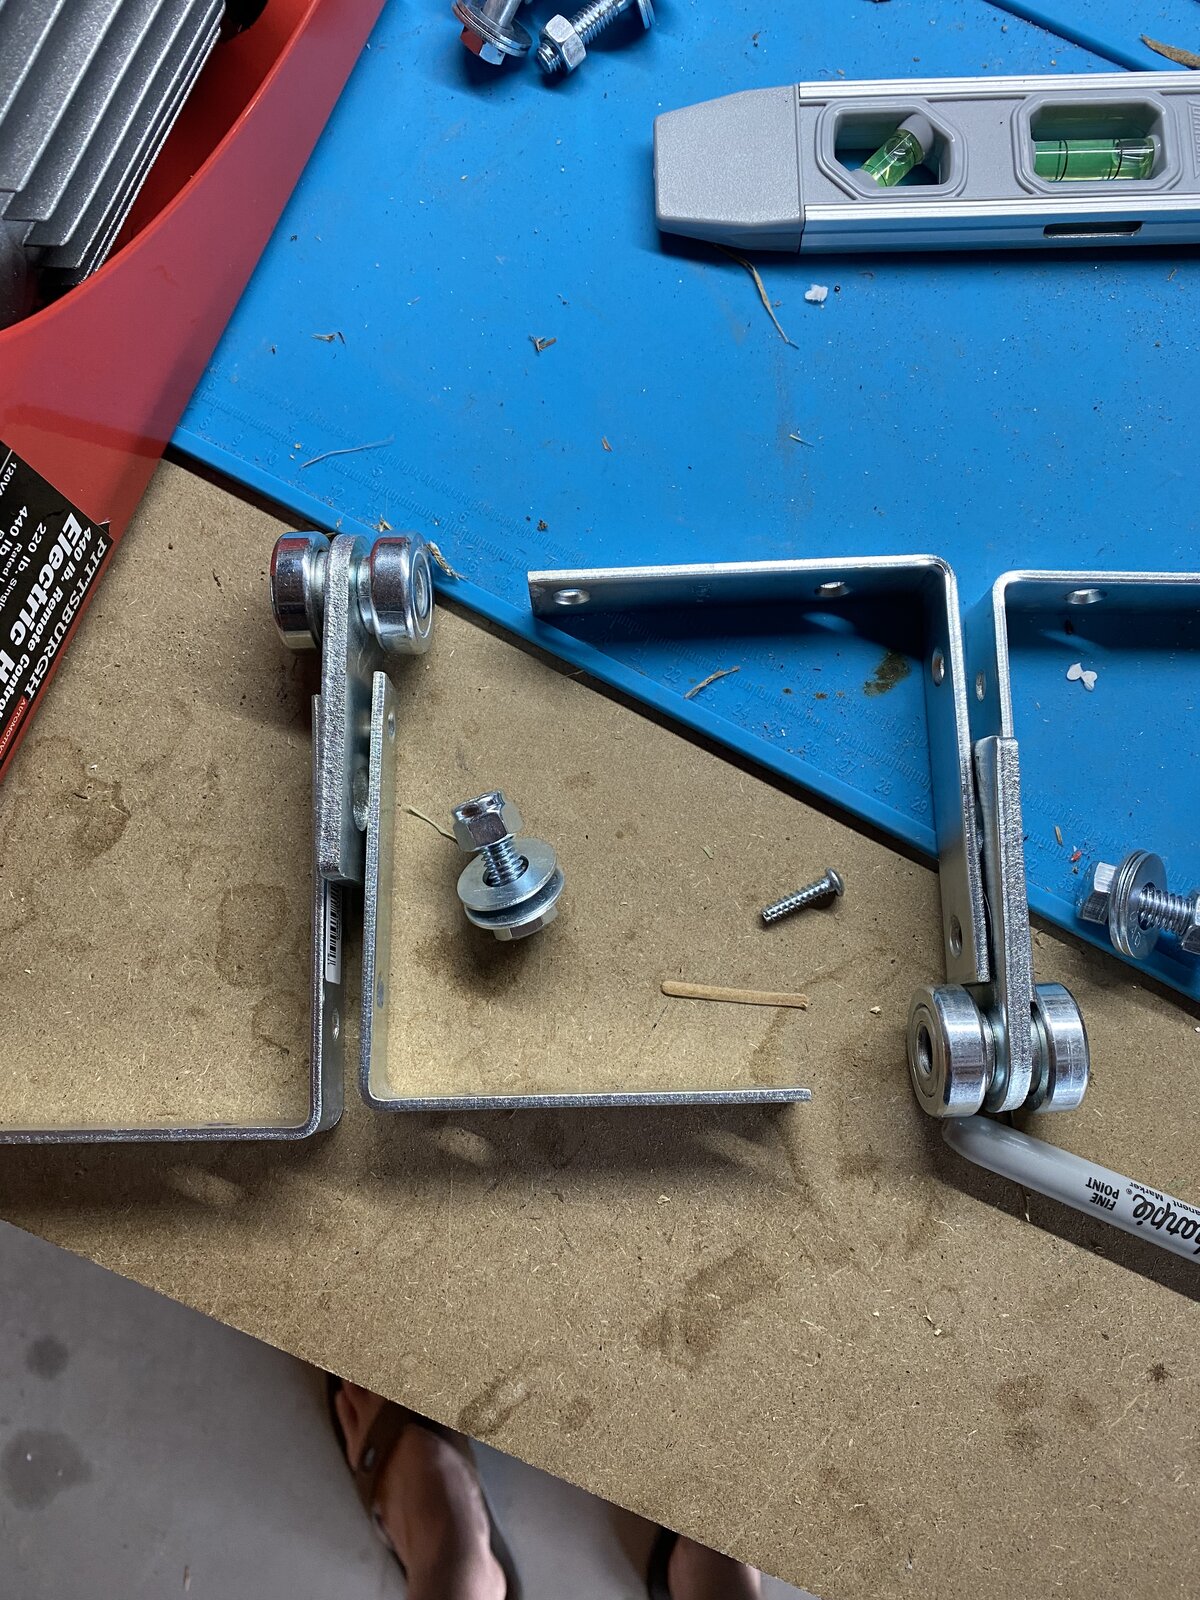 Jeep Gladiator Piecing together the perfect, for me, hardtop hoist 1CEECEA4-F609-4AED-814D-380A2C46DDFC